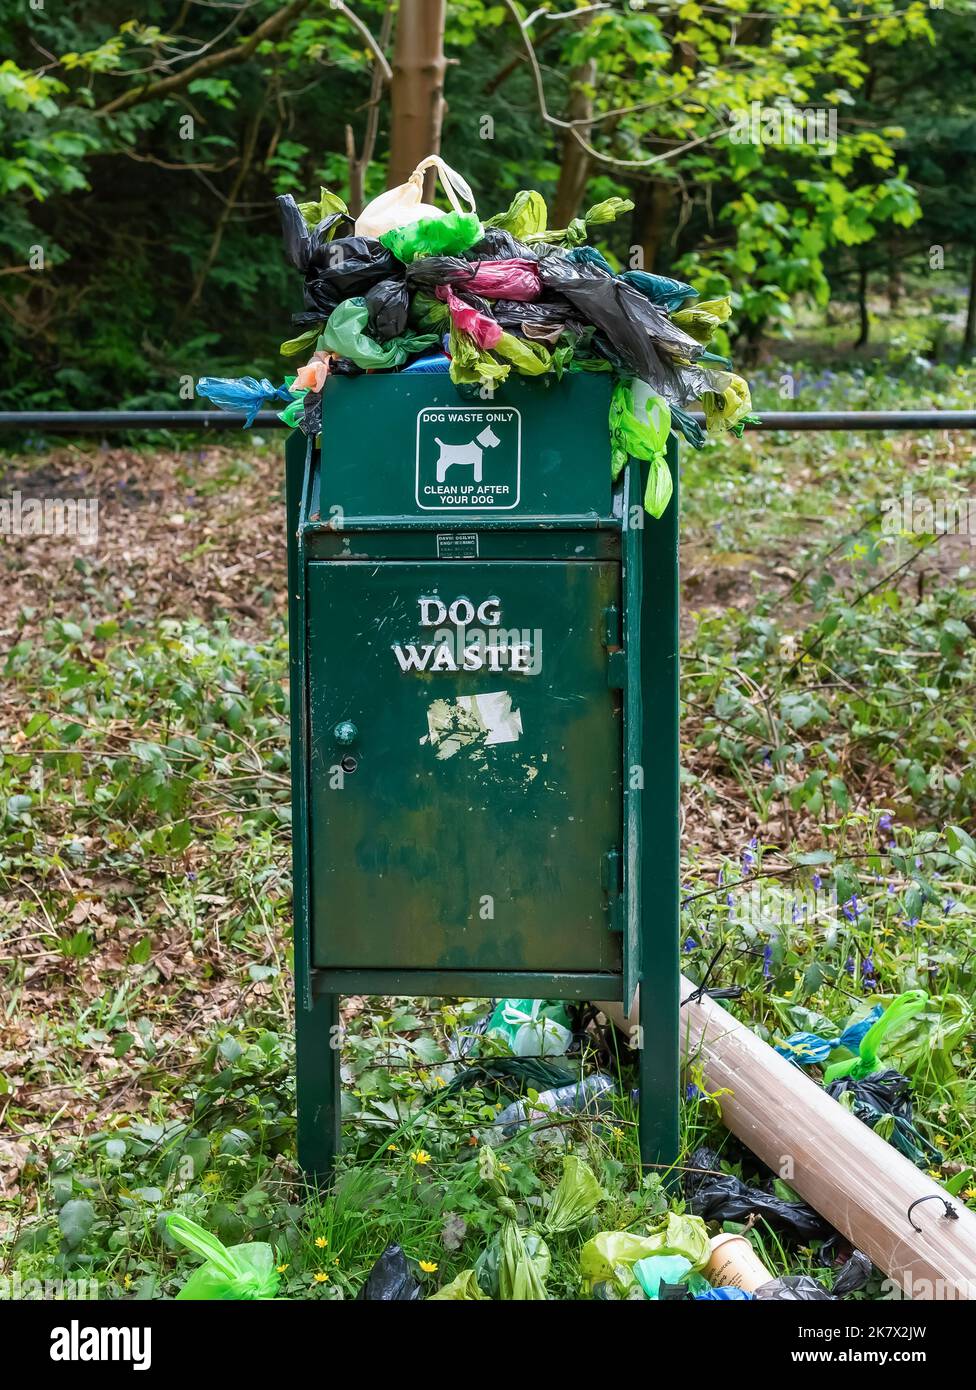 Dog waste bin, overflowing with plastic bags full of dog poo Stock Photo